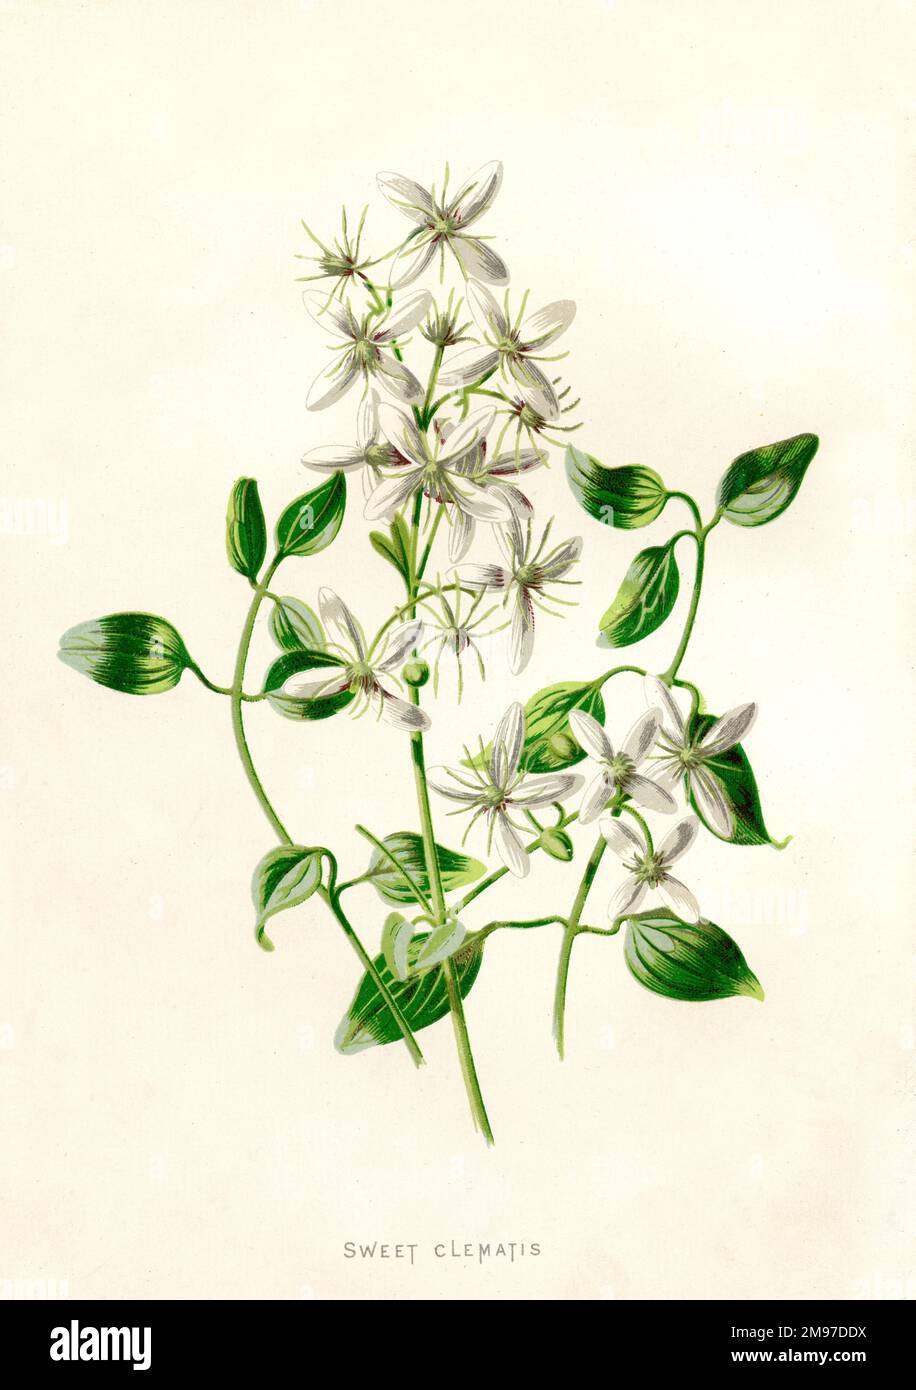 Beautiful botanical print of a sweet clematis plant Stock Photo